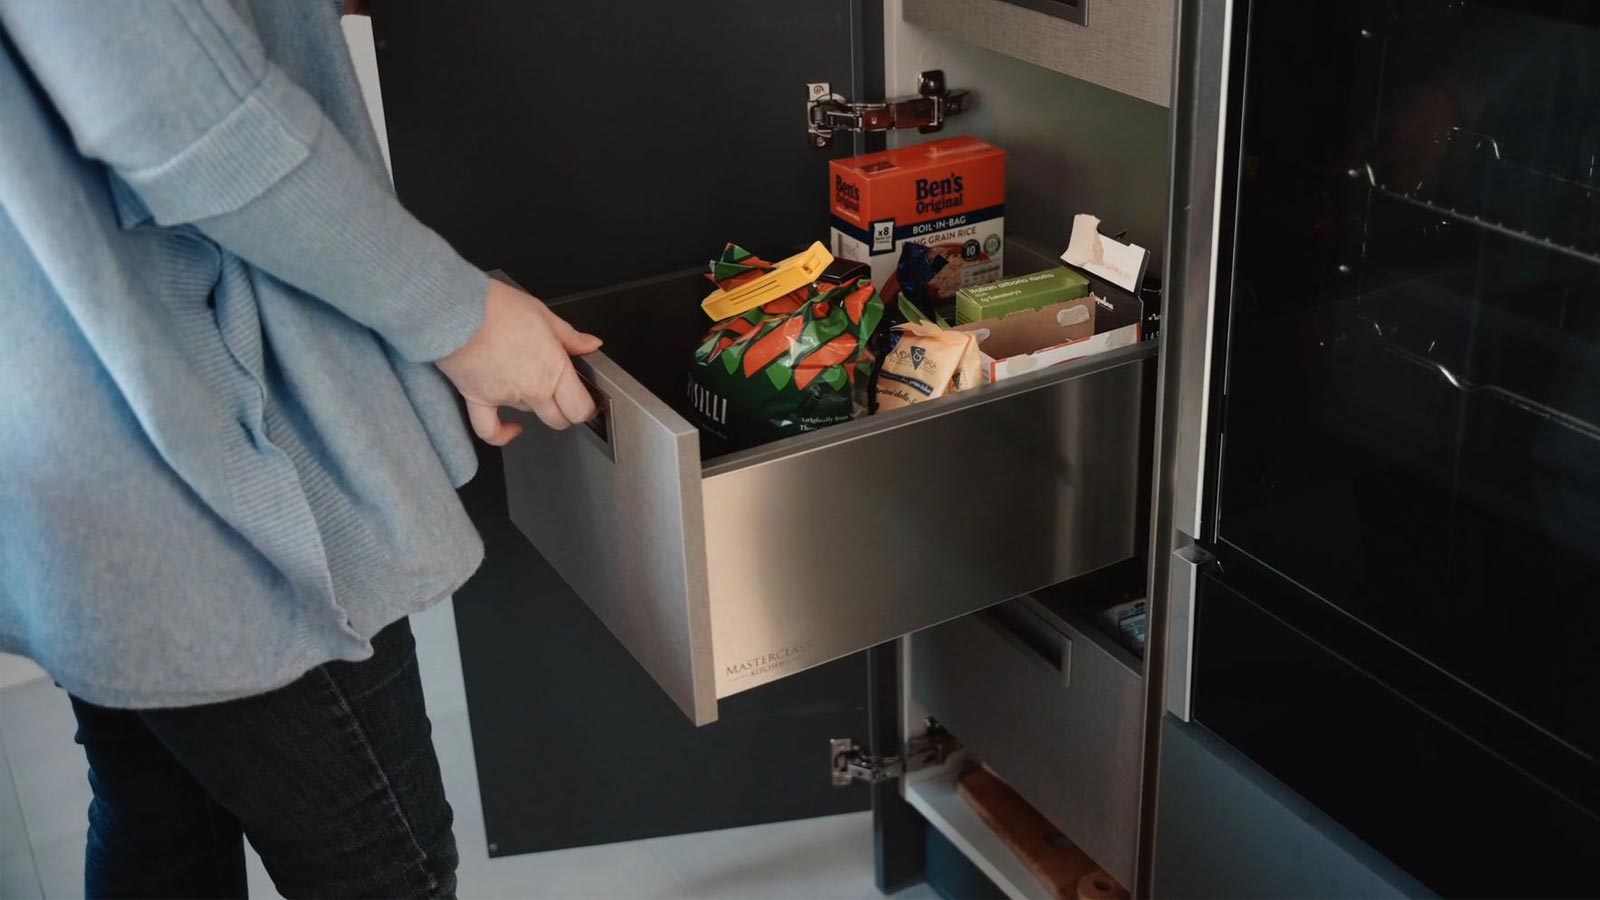 A SpaceTower larder acting as a kitchen unit pull-out storage solution